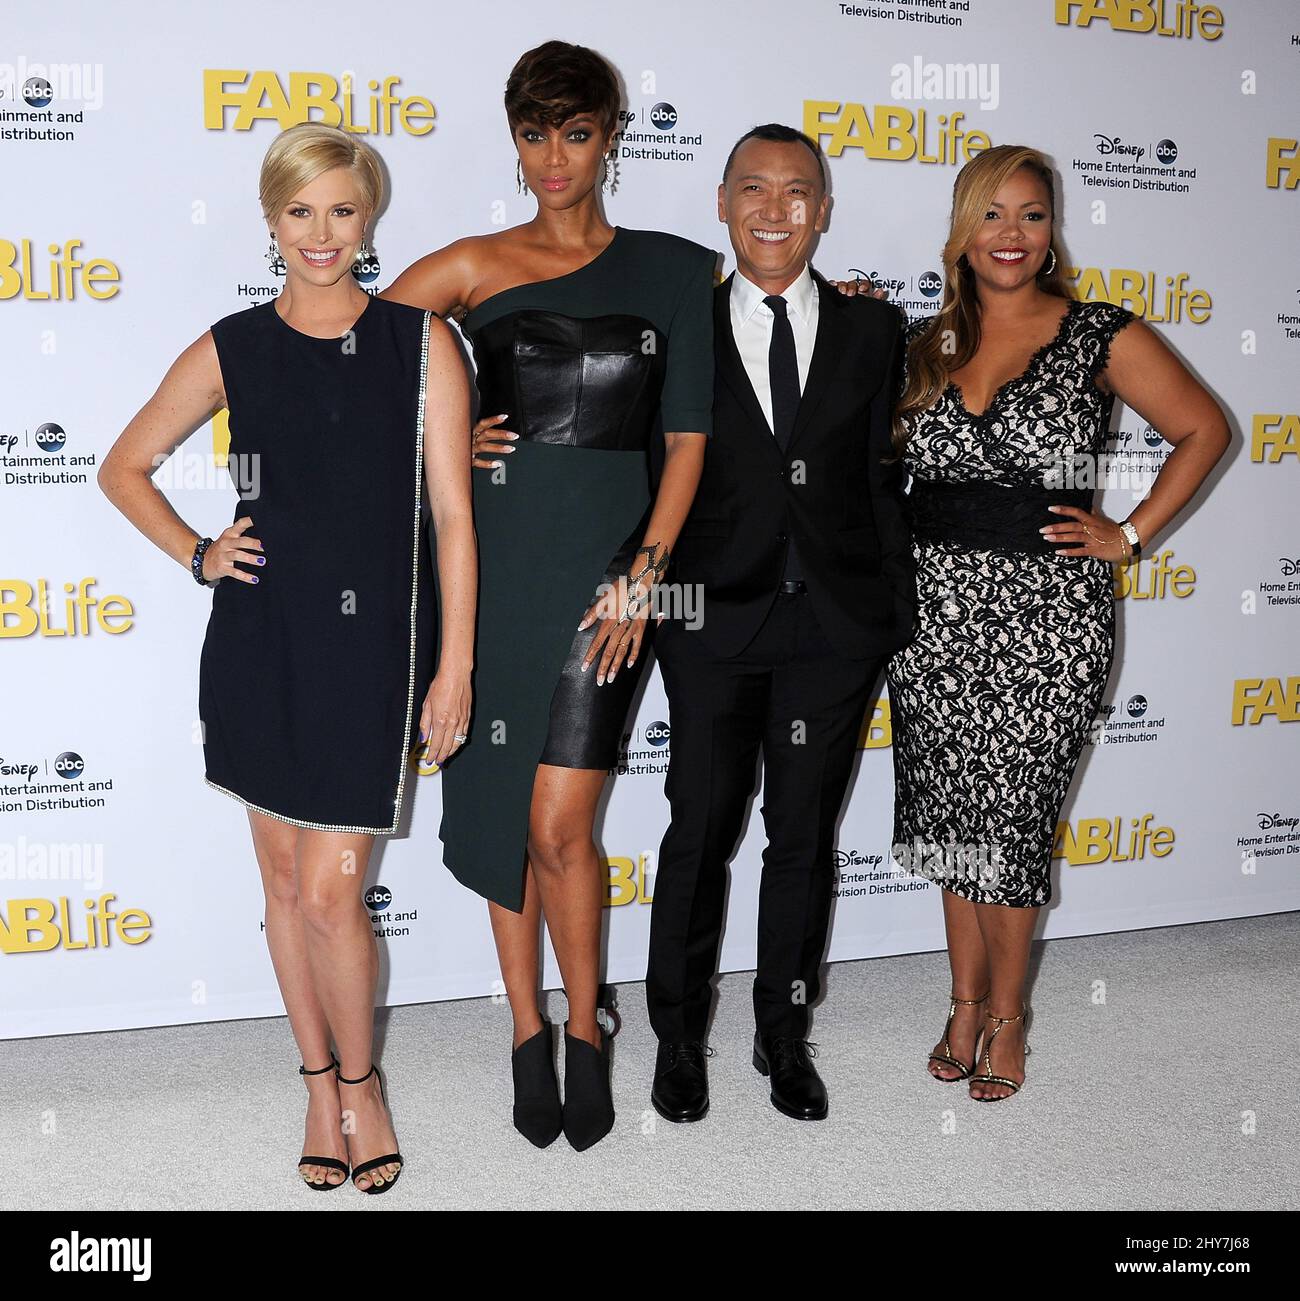 Leah Ashley, Tyra Banks, Joe Zee and Lauren Makk Disney ABC Television Group hosts TCA summer press tour red carpet event held at the Beverly Hilton Hotel Stock Photo